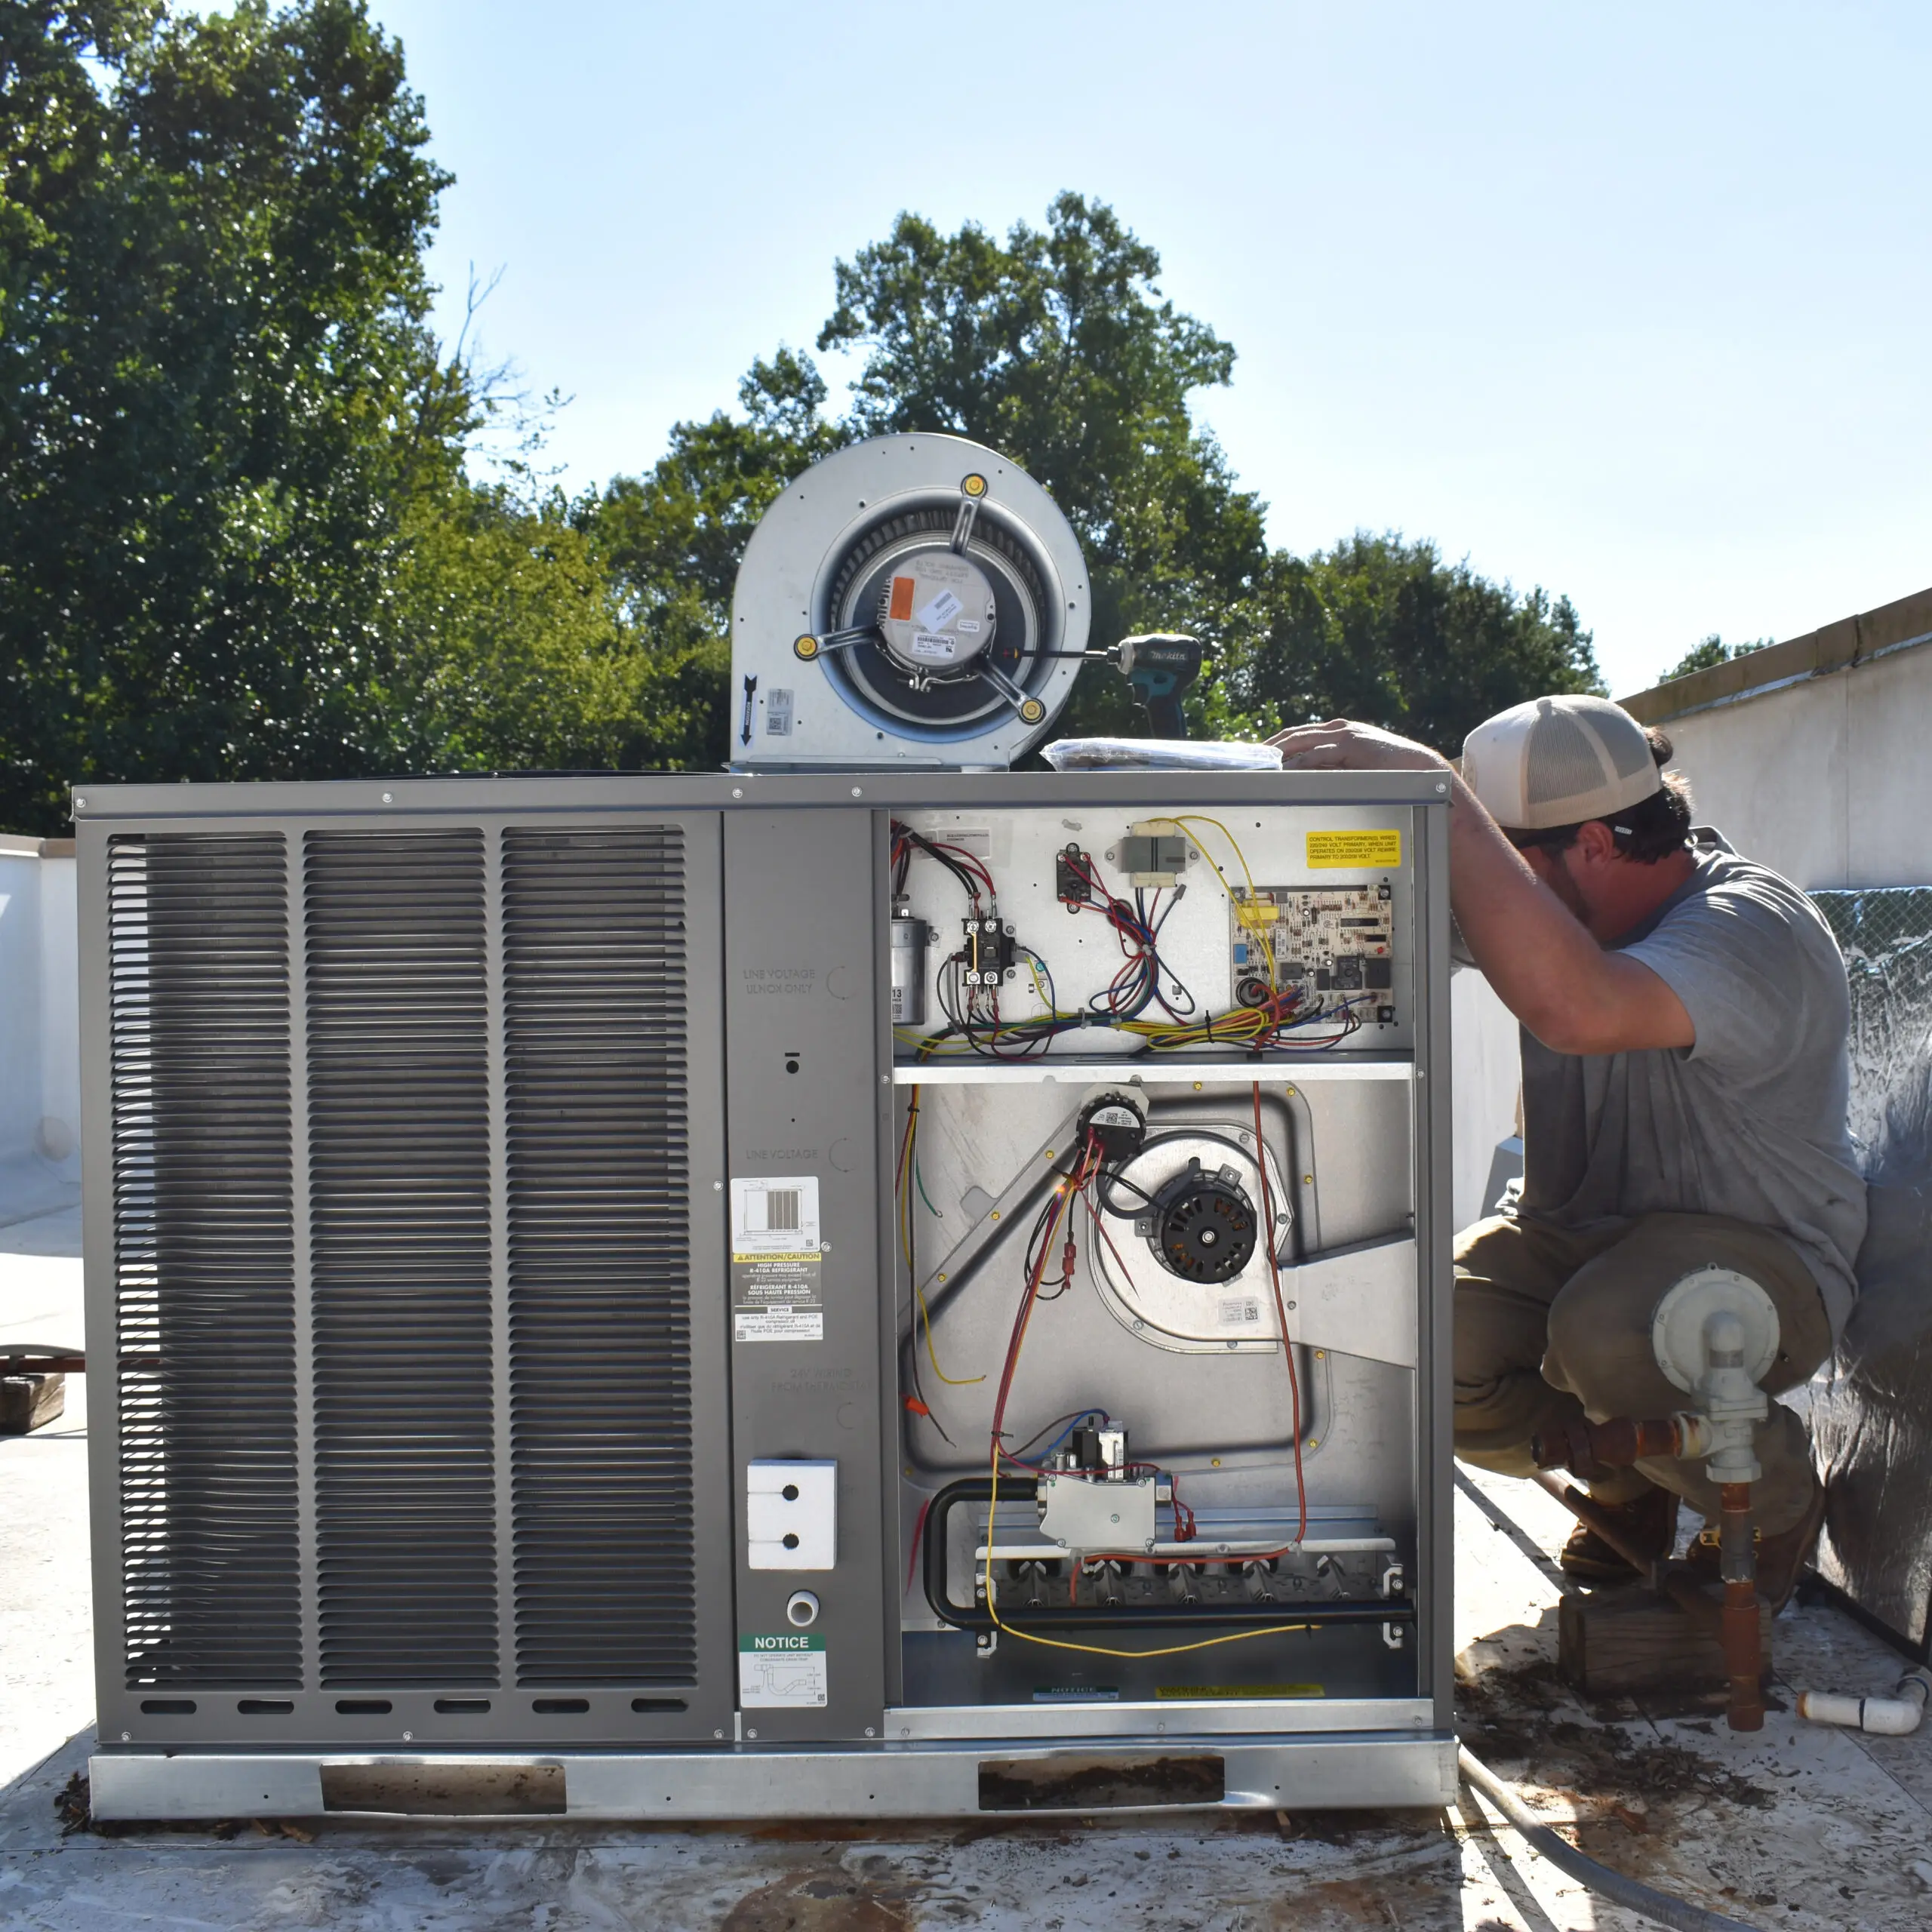 Upstate Climate Solutions' owner, Draysen Turner working on a residential HVAC system on the roof of an apartment building - kneeling on the ground inspecting behind the system